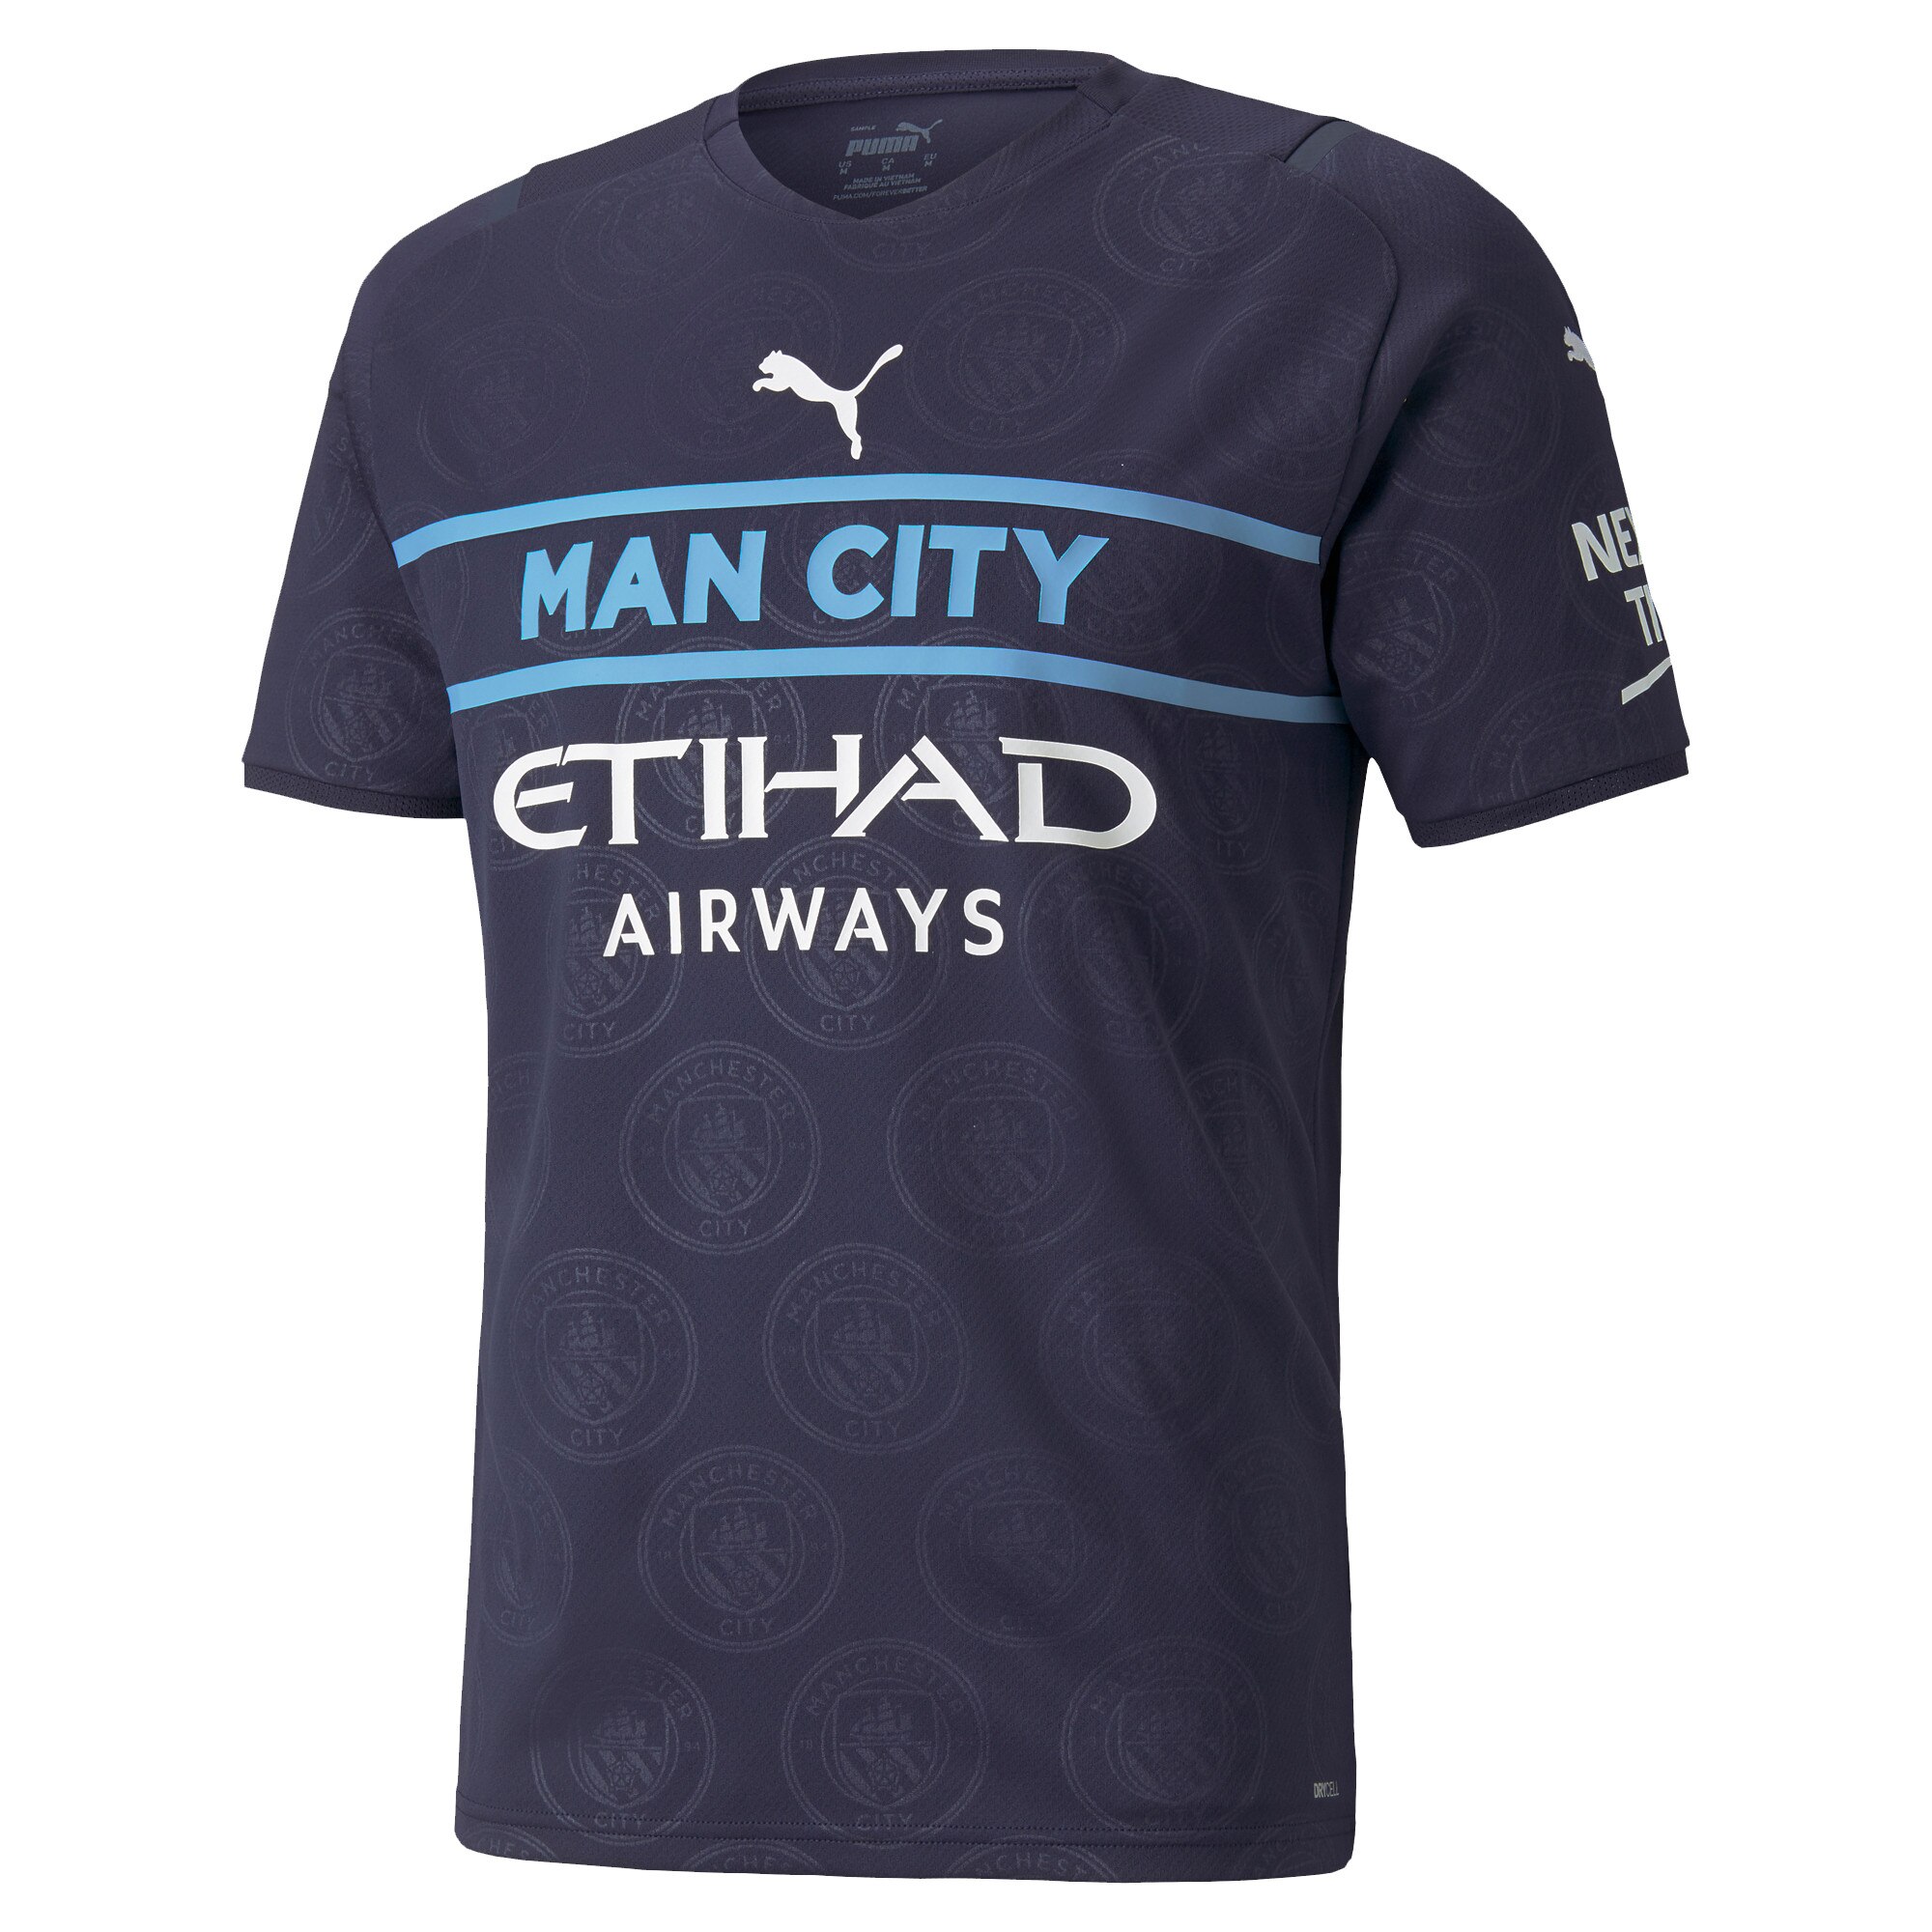 Manchester City Third Shirt 2021-22 with Laporte 14 printing